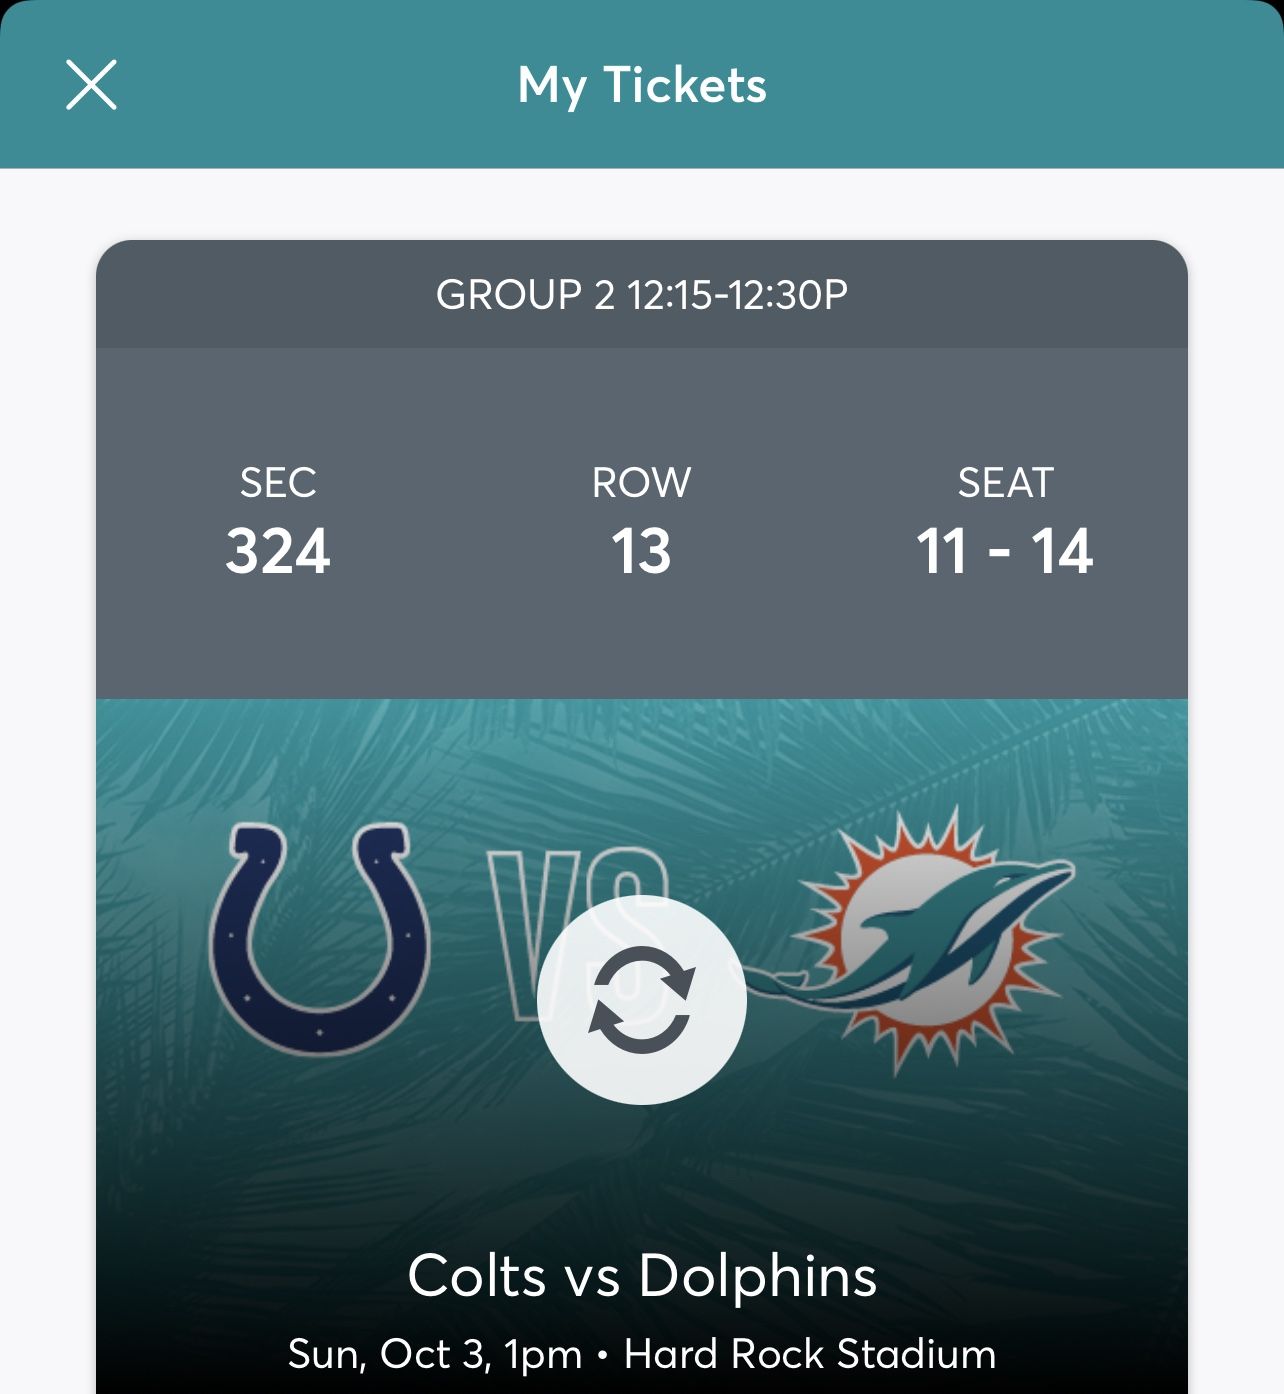 Miami Dolphins 4 Tickets $40each  With Free Parking 